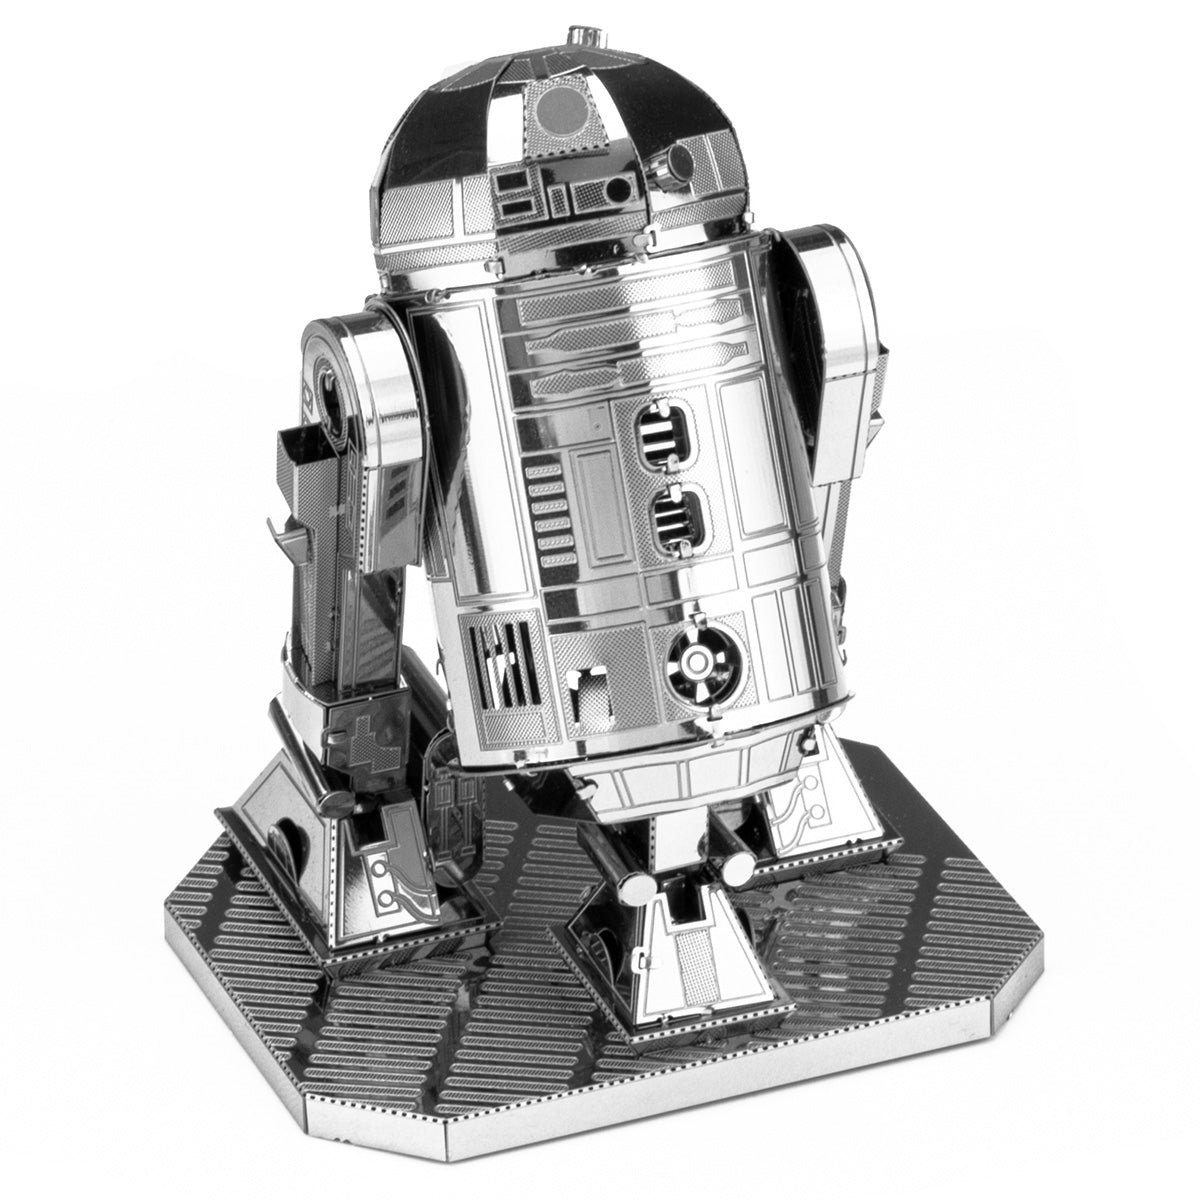 FMW250 R2-D2 (Buildable) 